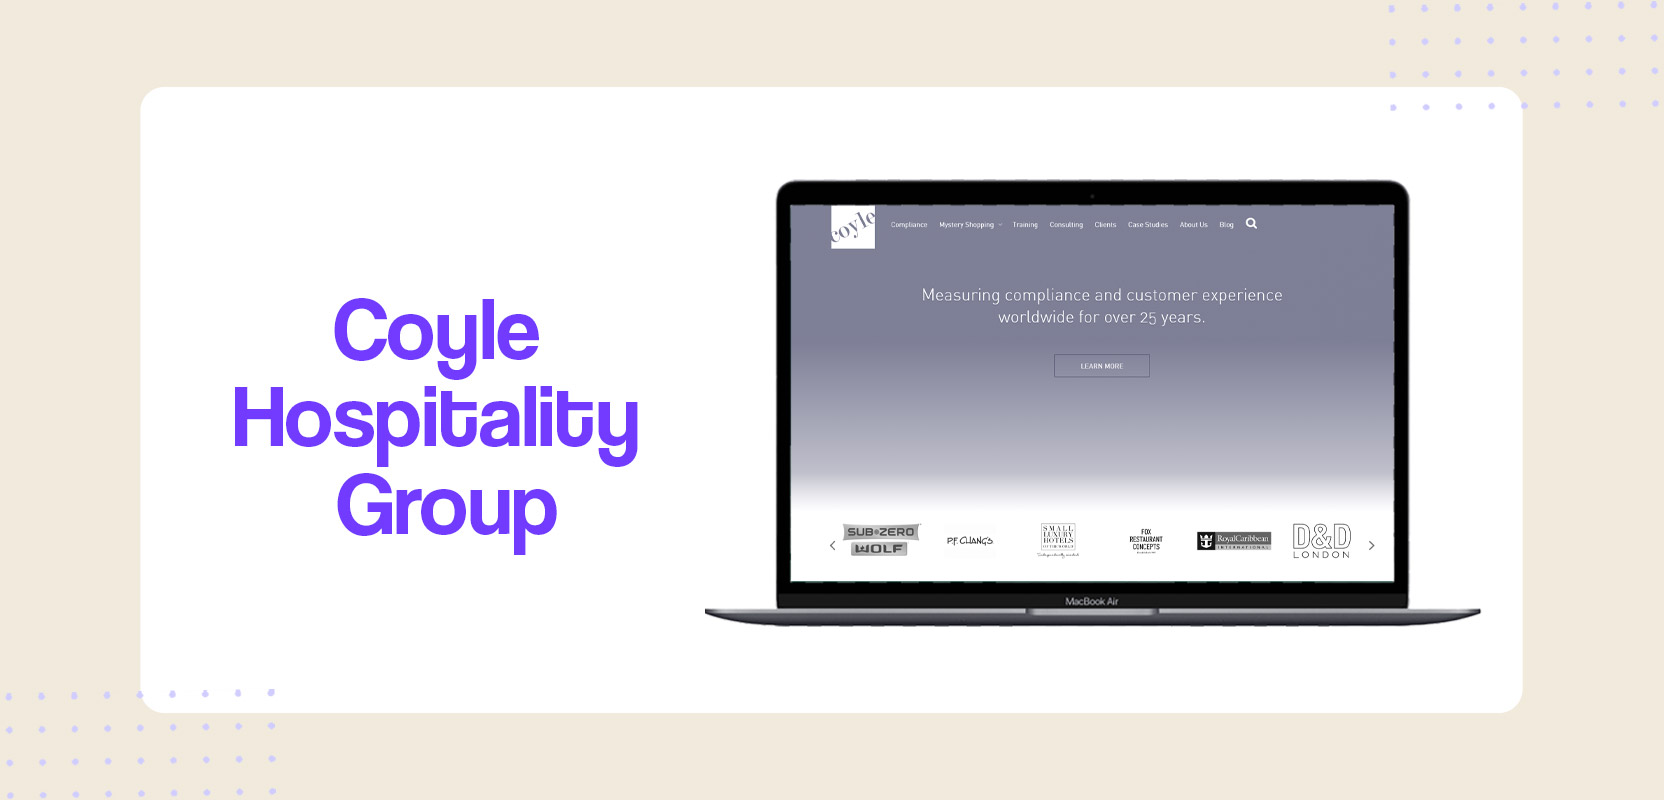 Laptop screen showing the Coyle Hospitality Group website